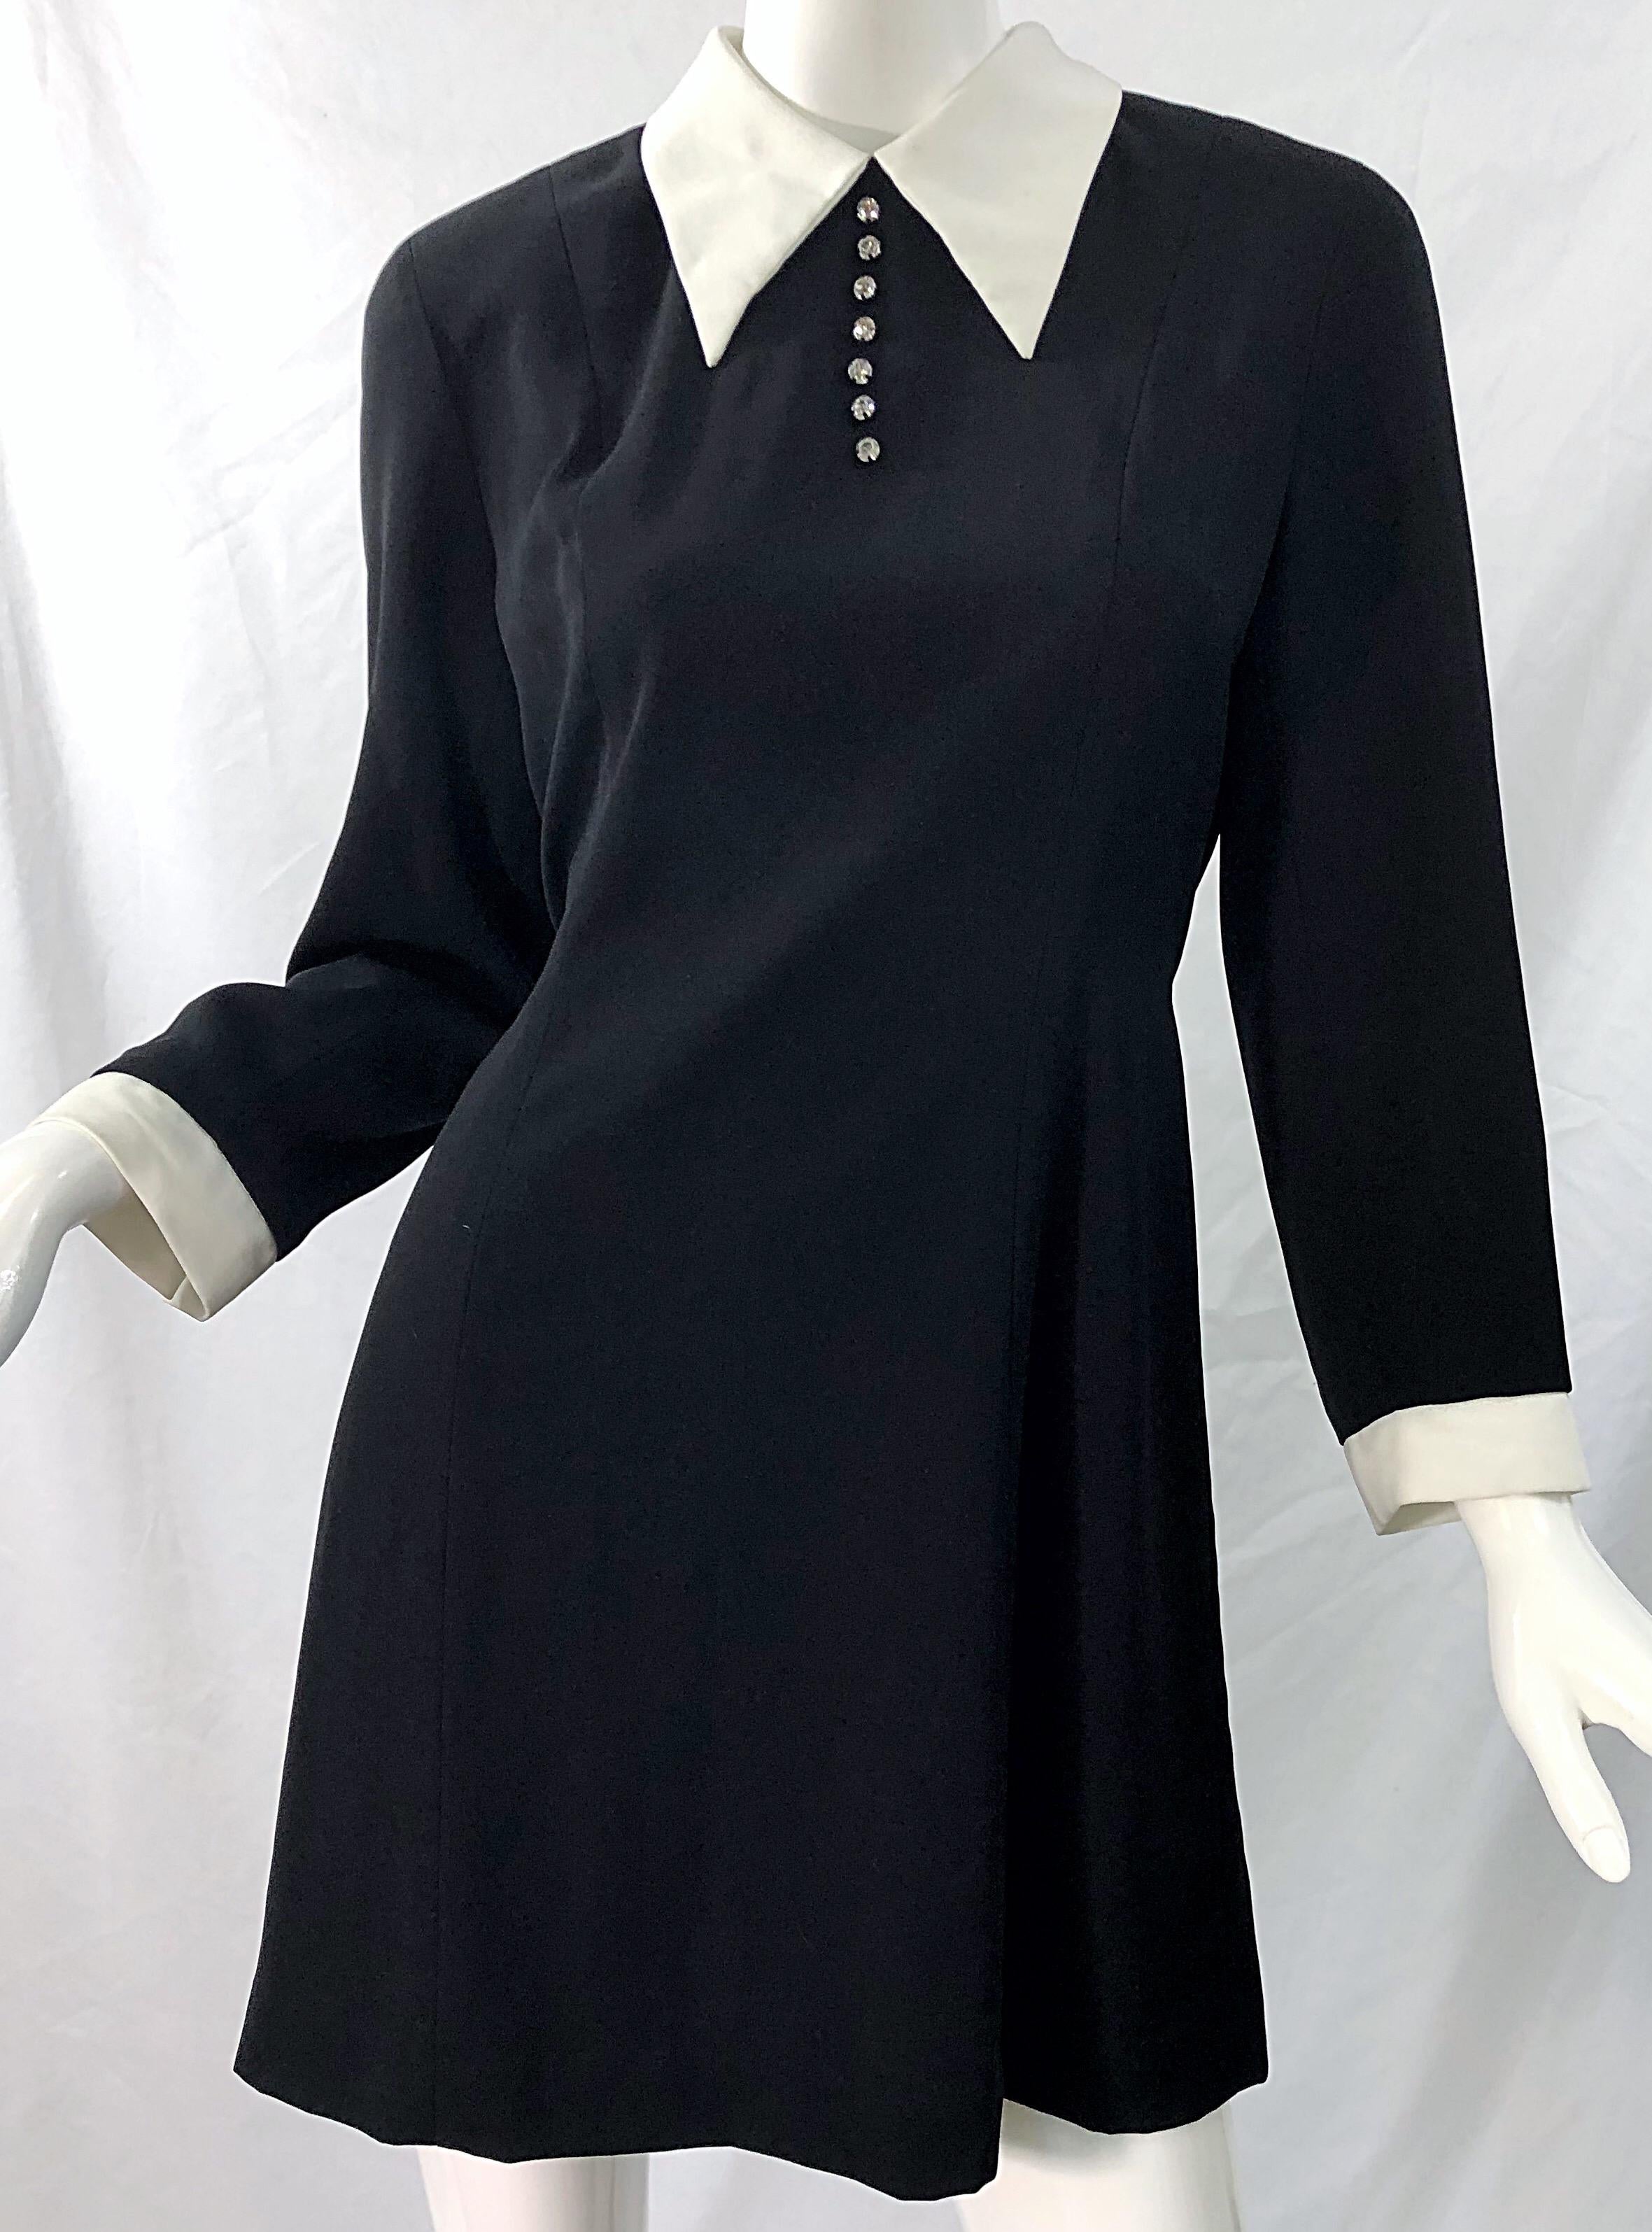 Vintage Givenchy 1990s Black and White Rhinestone Long Sleeve 90s Mini Dress For Sale 2